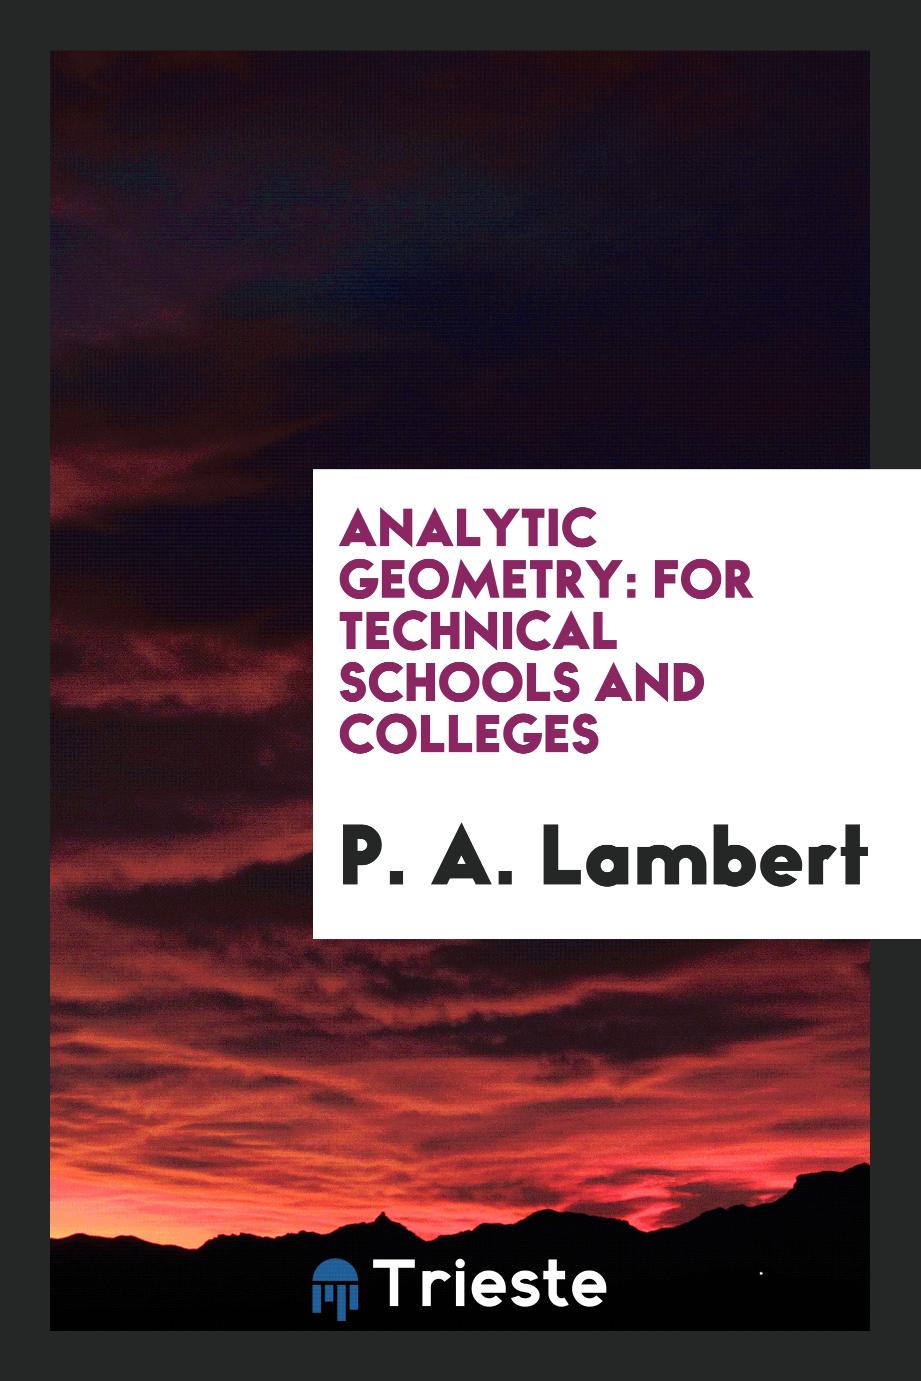 Analytic Geometry: For Technical Schools and Colleges